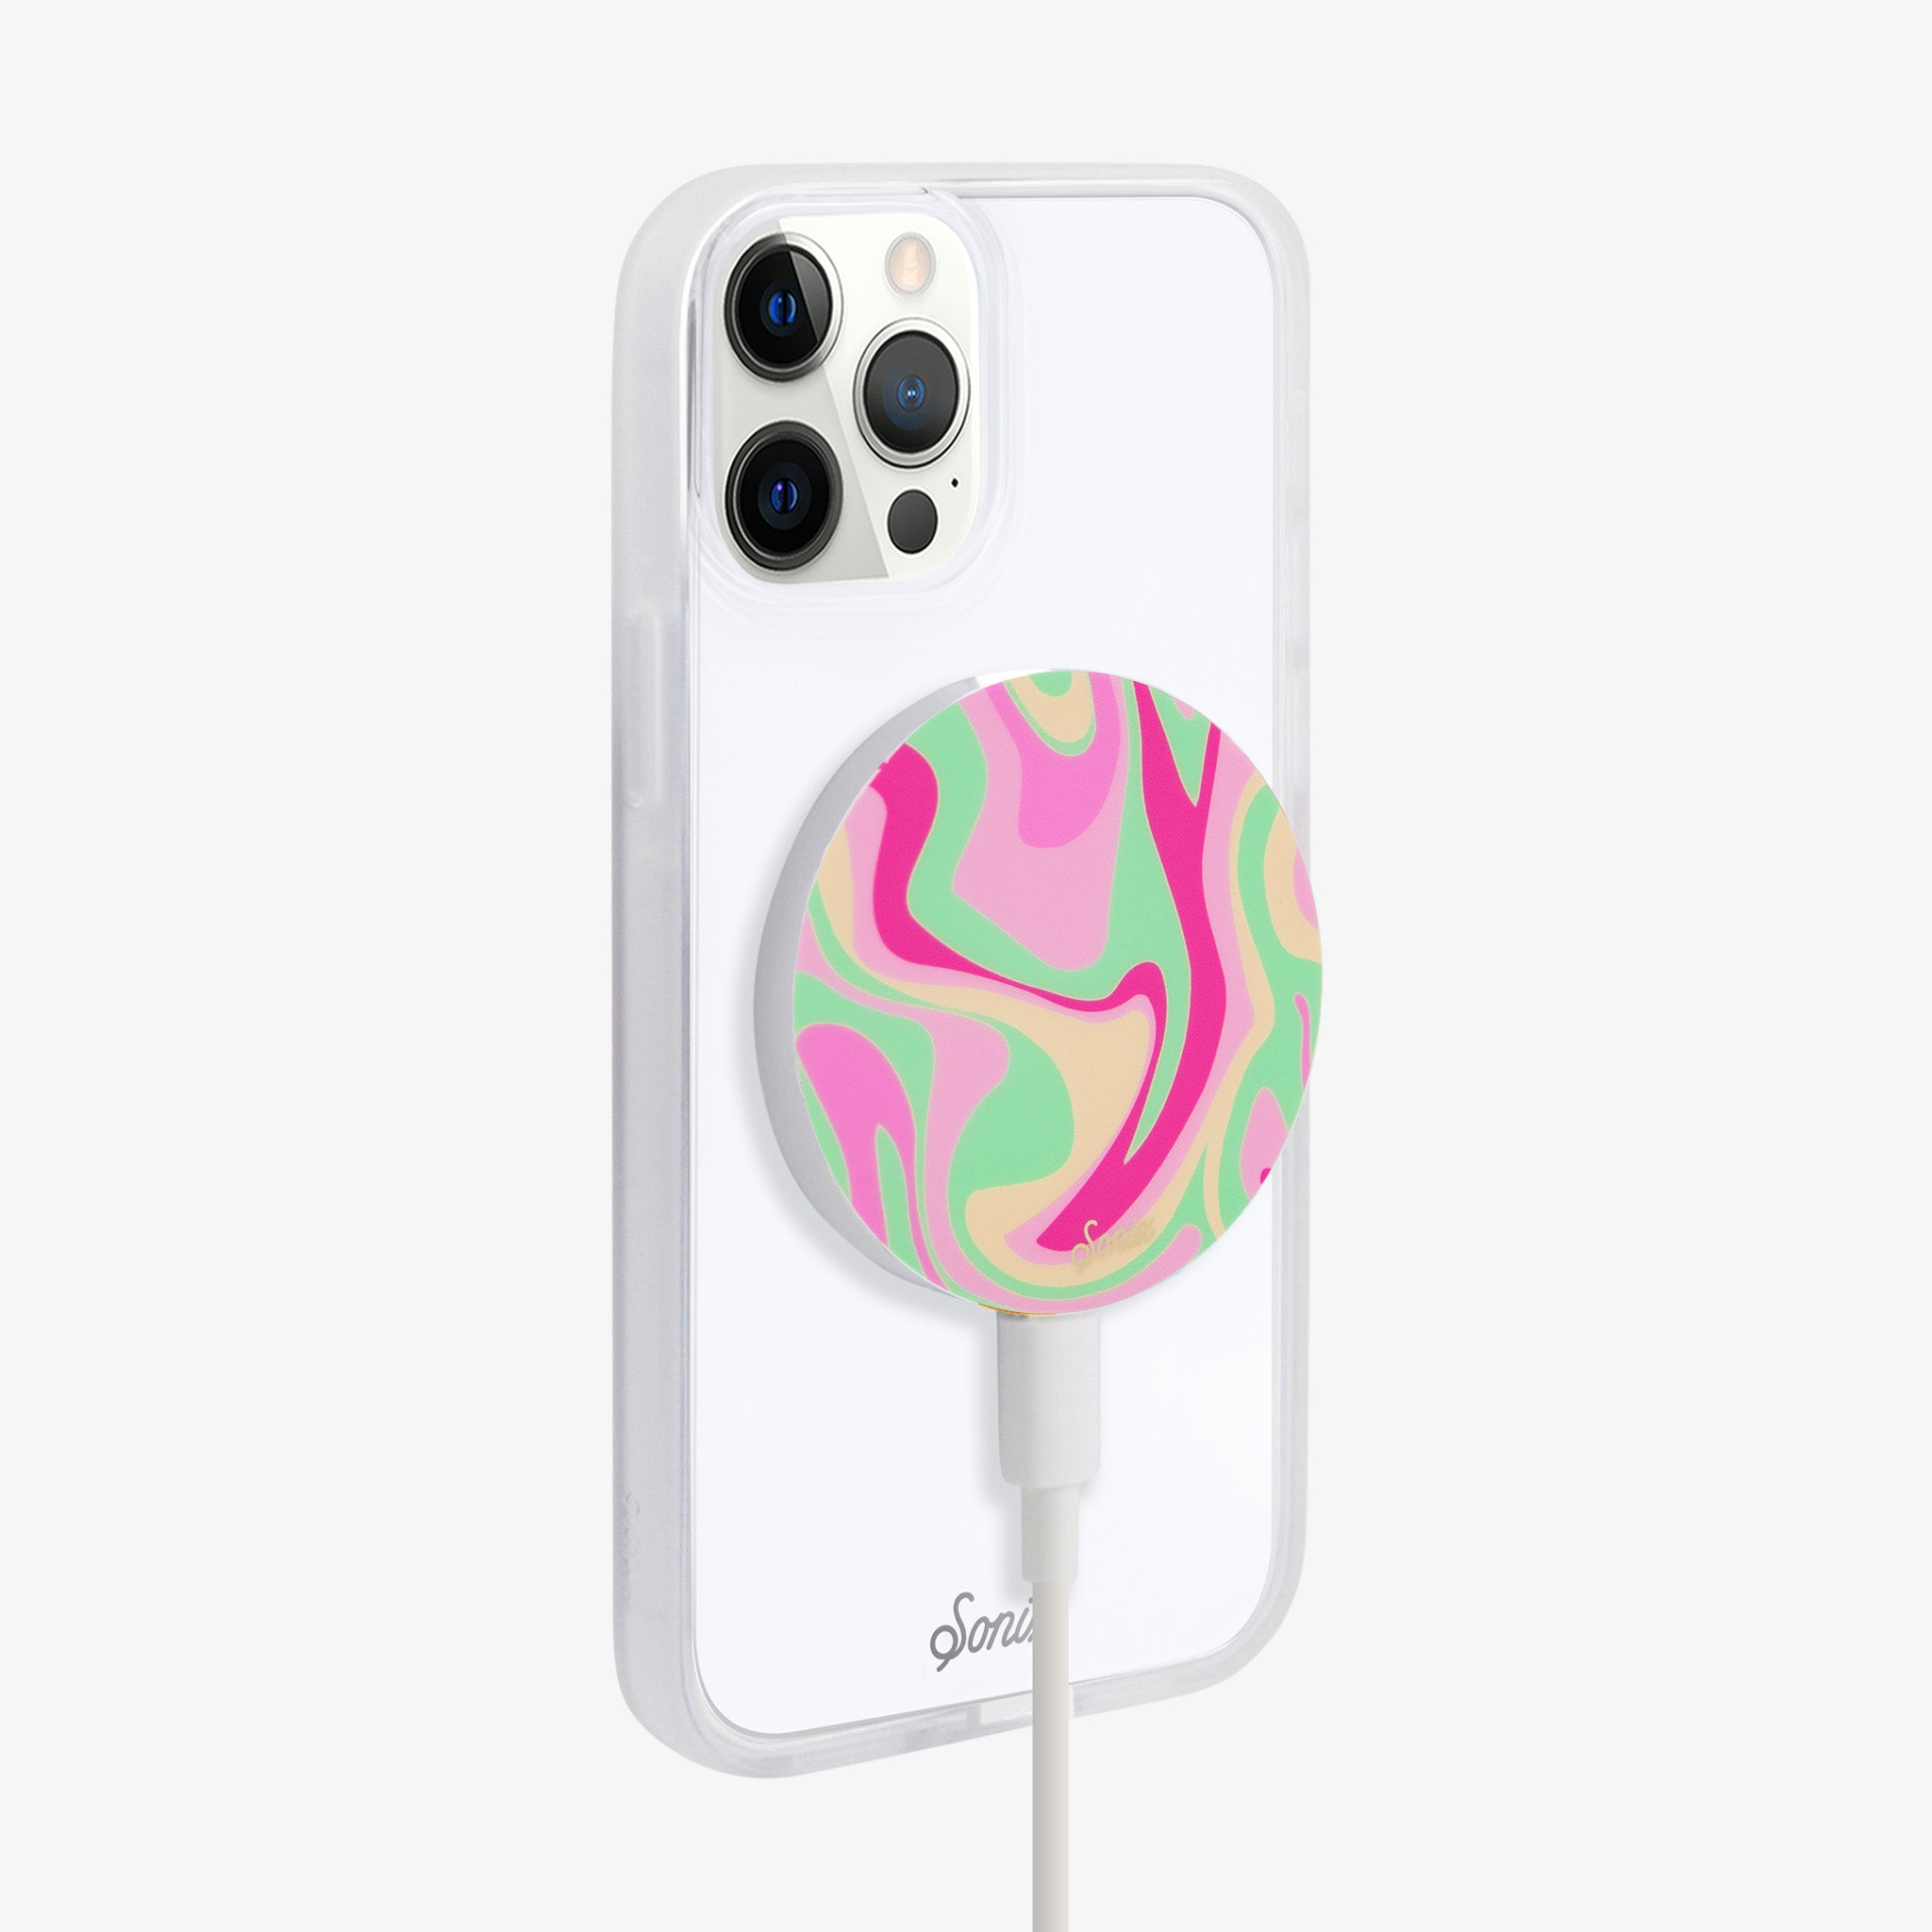 MagLink™ Magnetic Charger - Strawberry Matcha